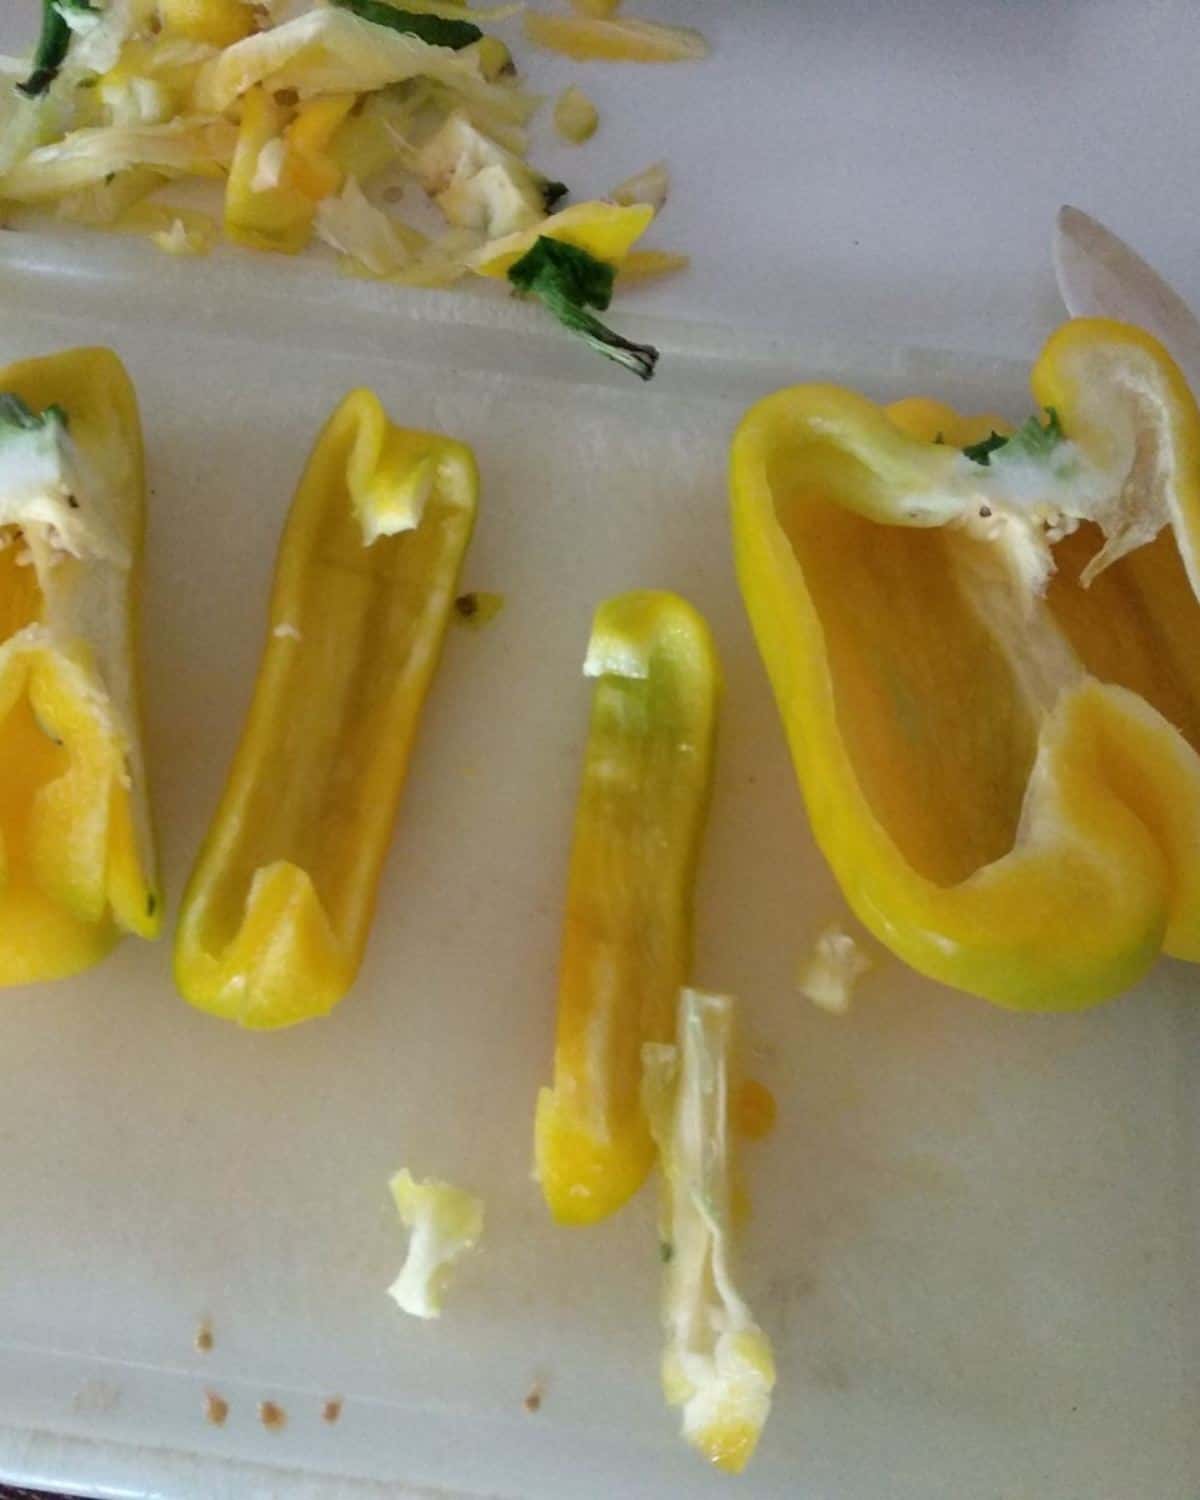 Process - Cutting Peppers